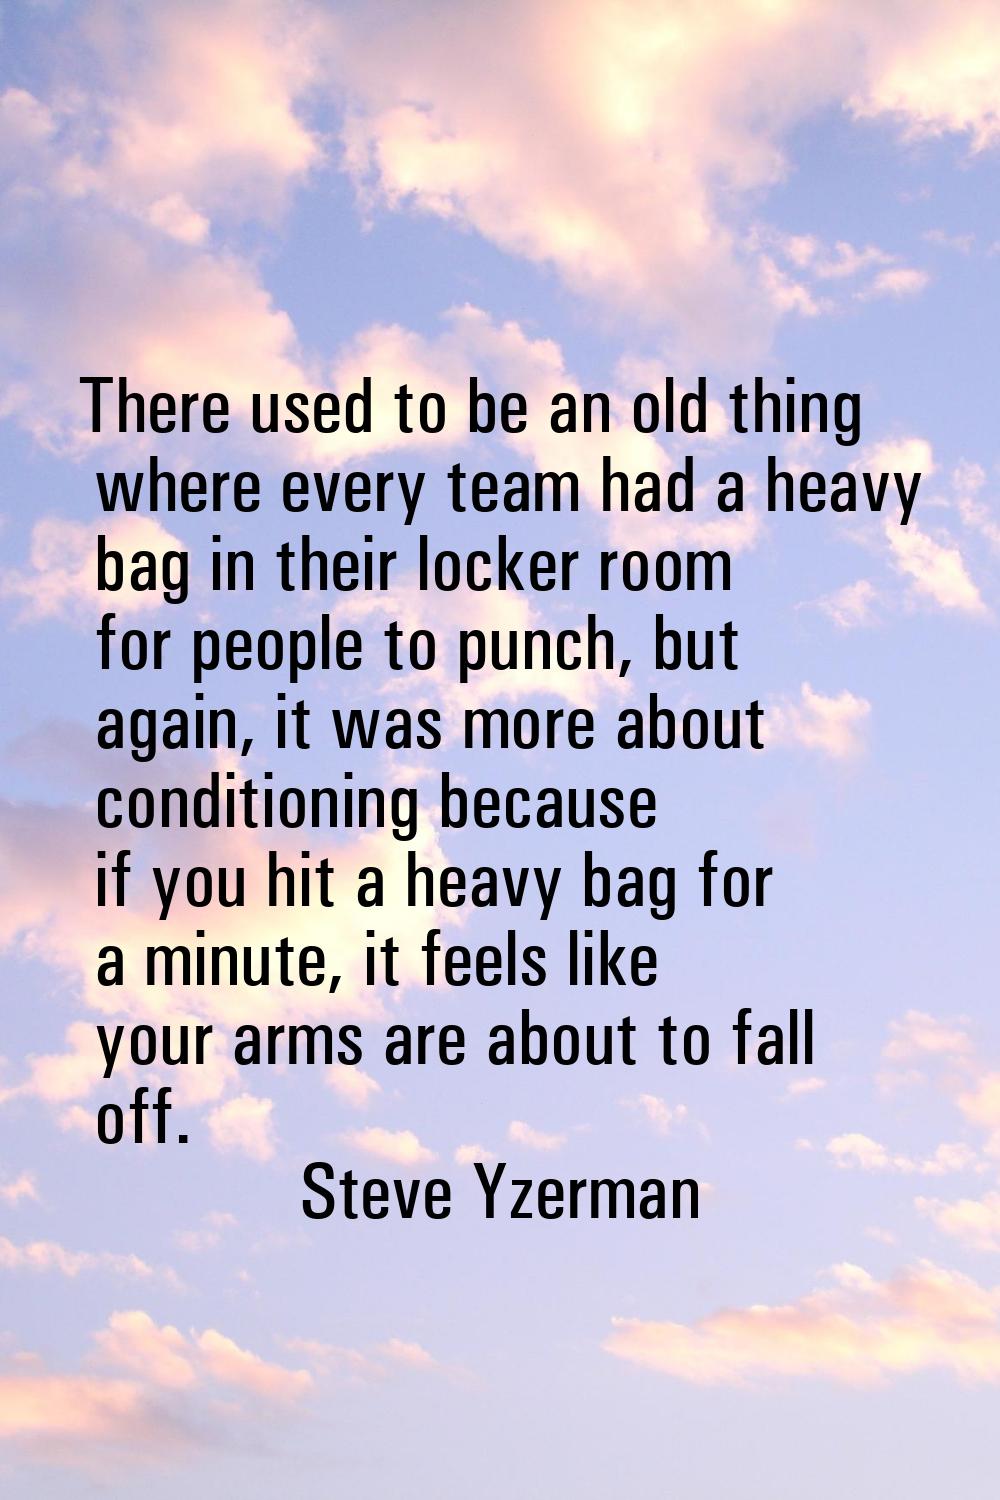 There used to be an old thing where every team had a heavy bag in their locker room for people to p